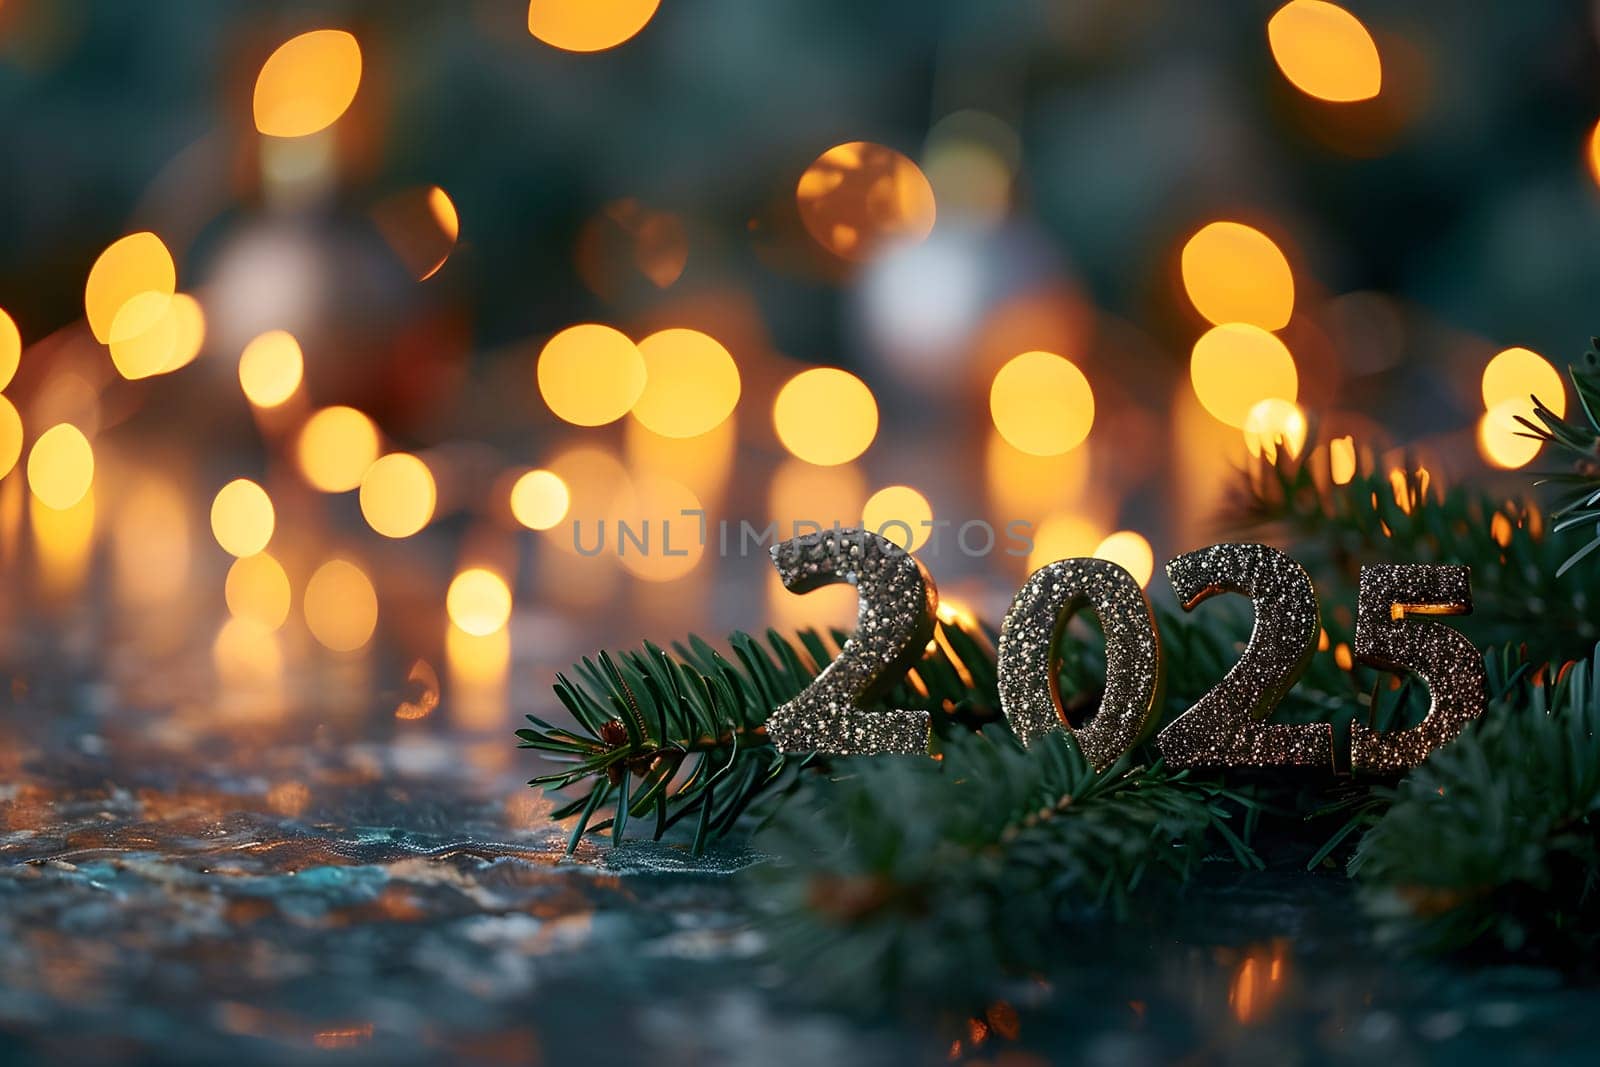 digits 2025 surrounded with Christmas decorations for new year celebration by z1b